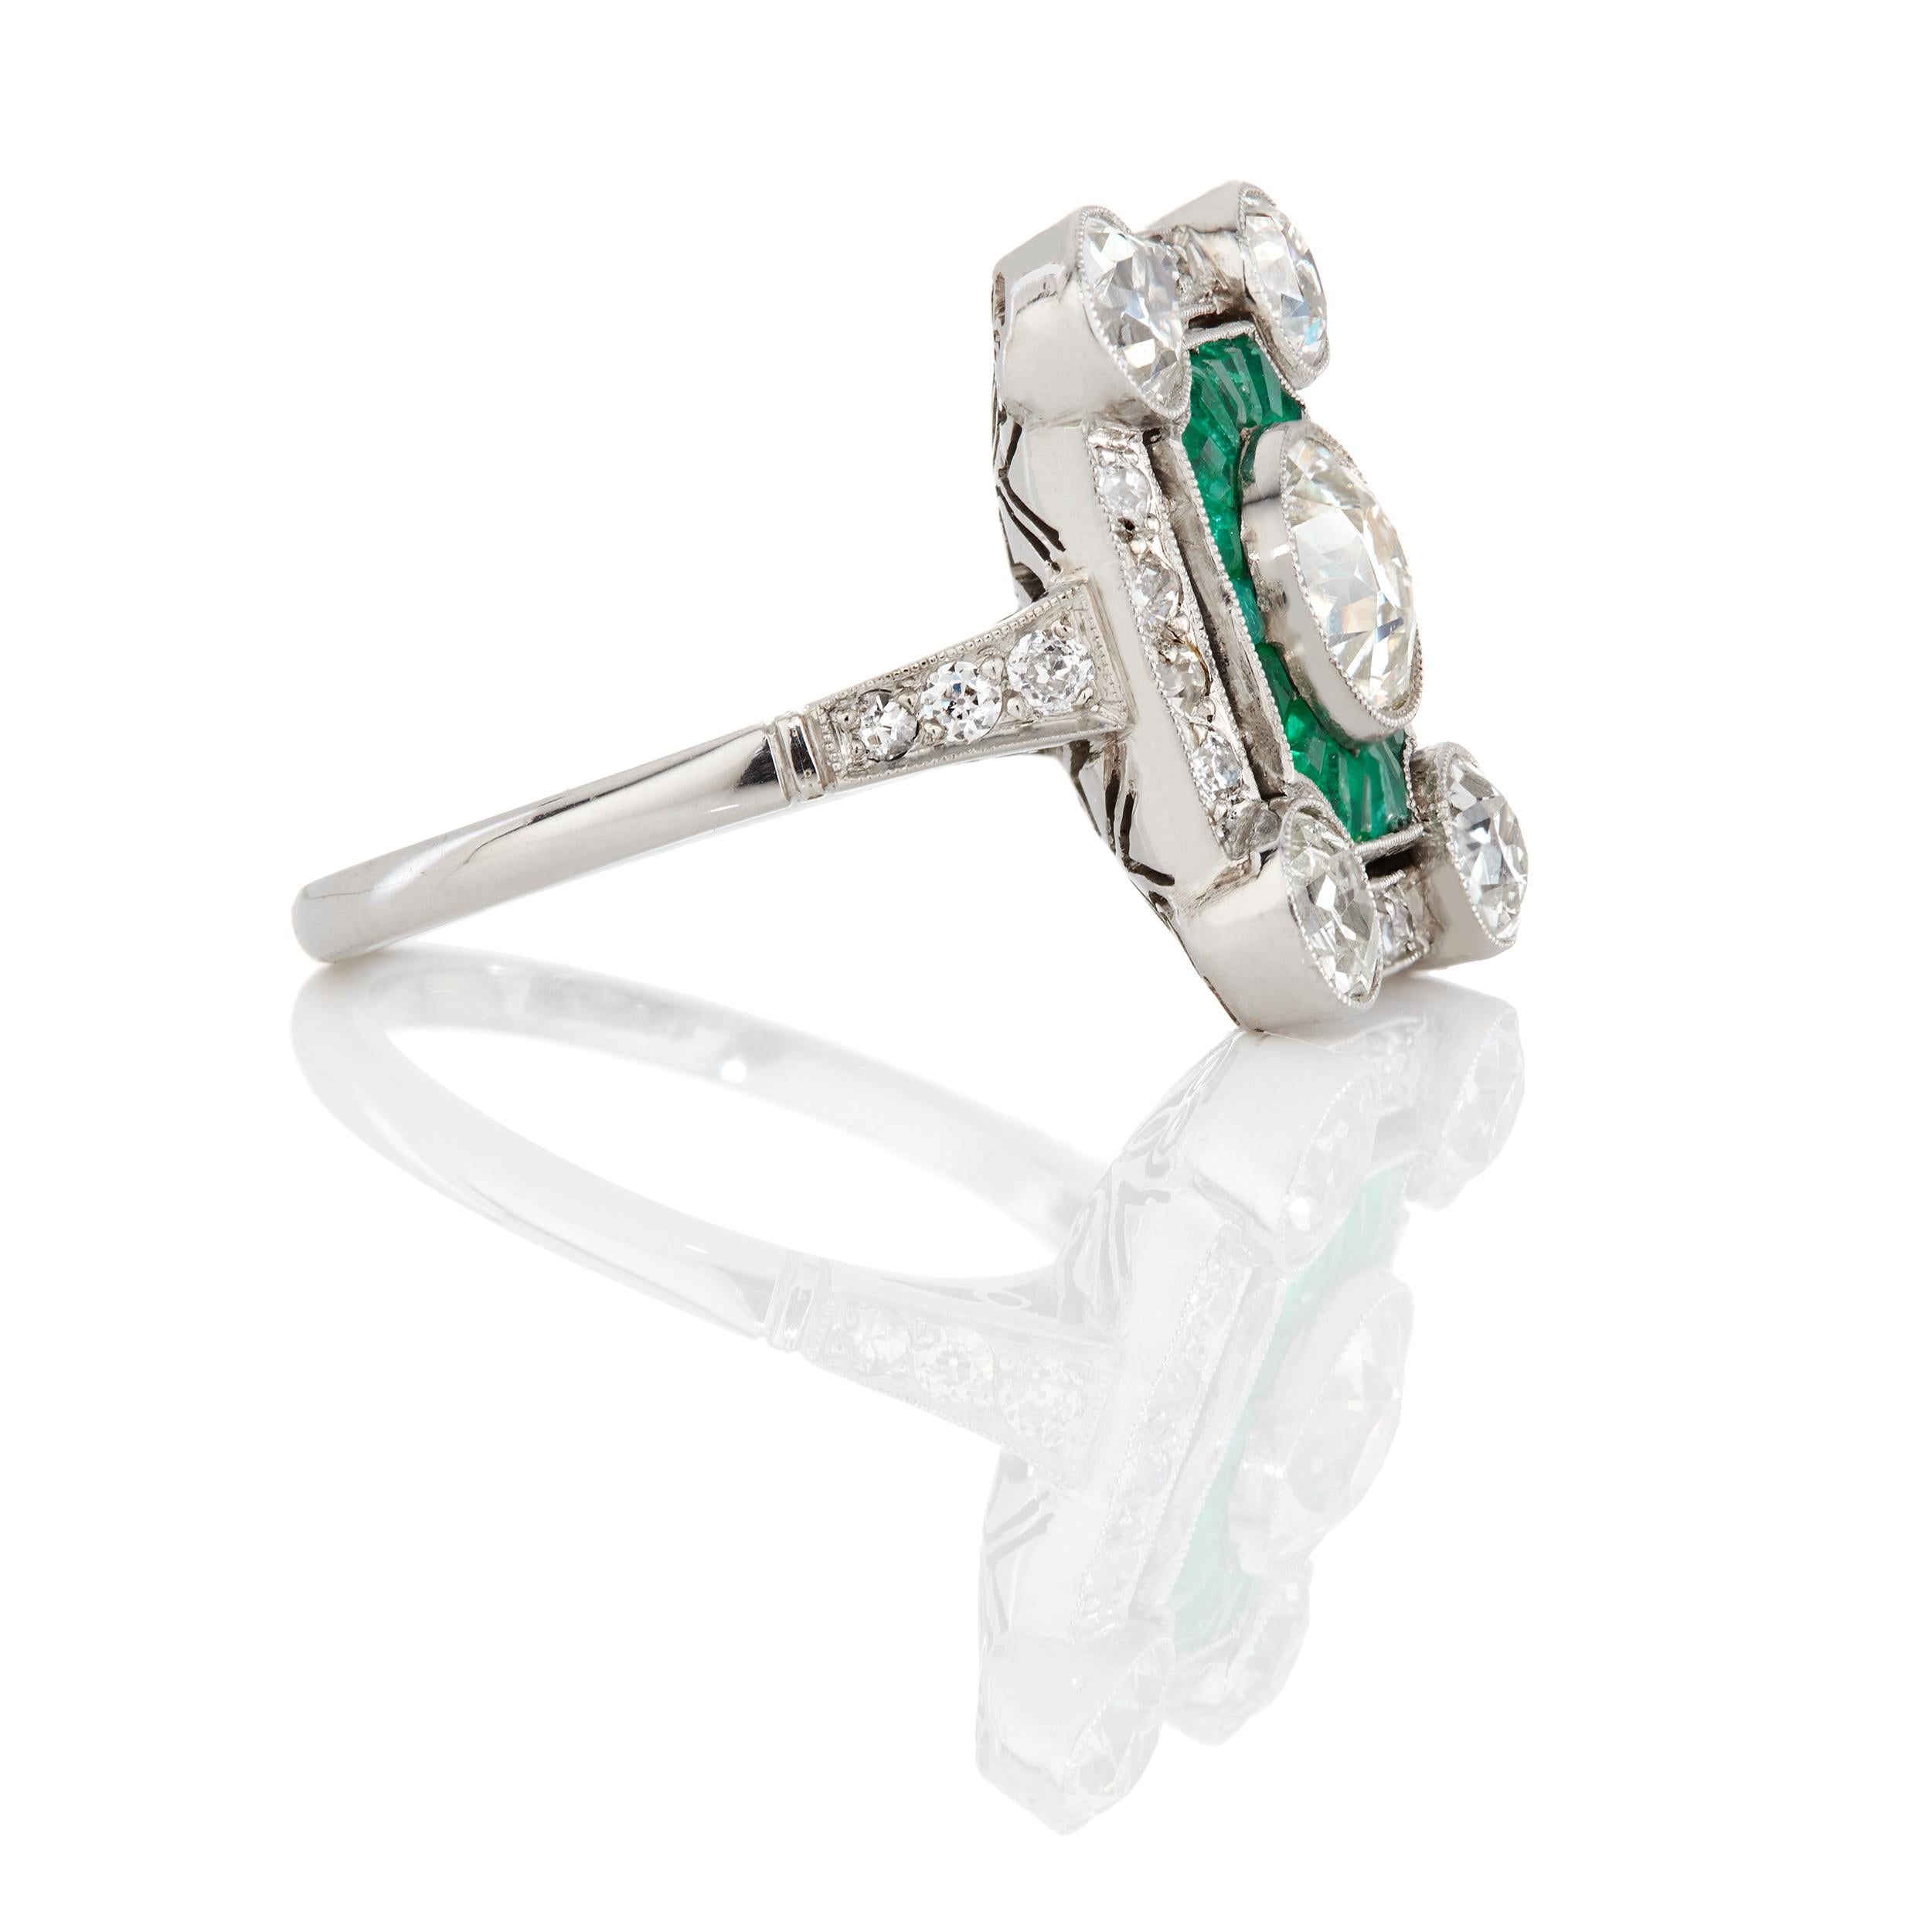 Overall Description:

Center Diamond: 
     •6.5 x 6.5 x 4.35 mm
     •1.18 Carats

Natural Emerald Baguetts
     •0.32 Carats 
     
Ring Size: 6.5

Top Measure: 17.16 mm

Weight: 7.4 grams

Length: 24.96 mm 